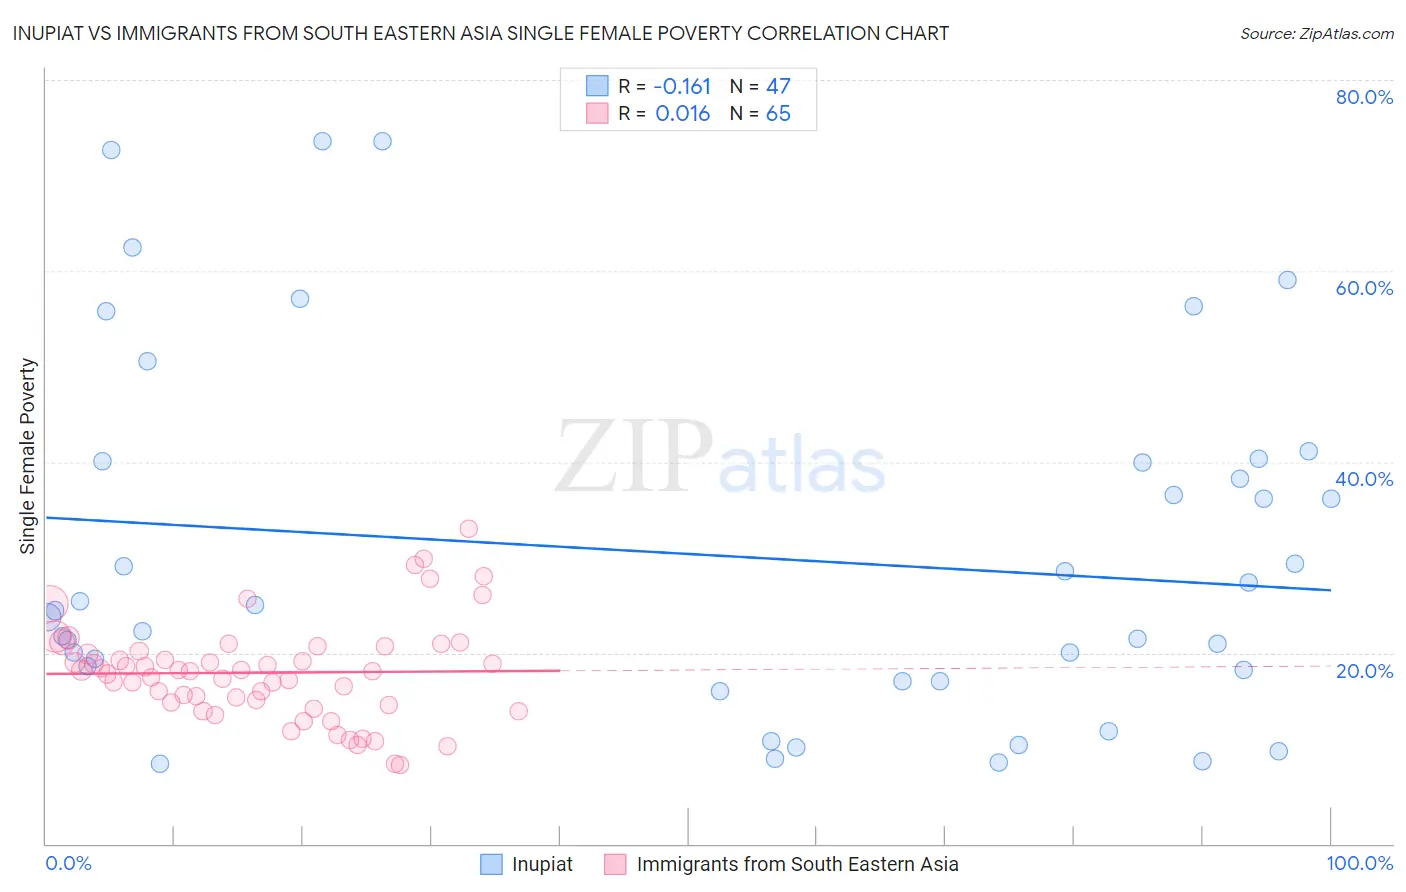 Inupiat vs Immigrants from South Eastern Asia Single Female Poverty